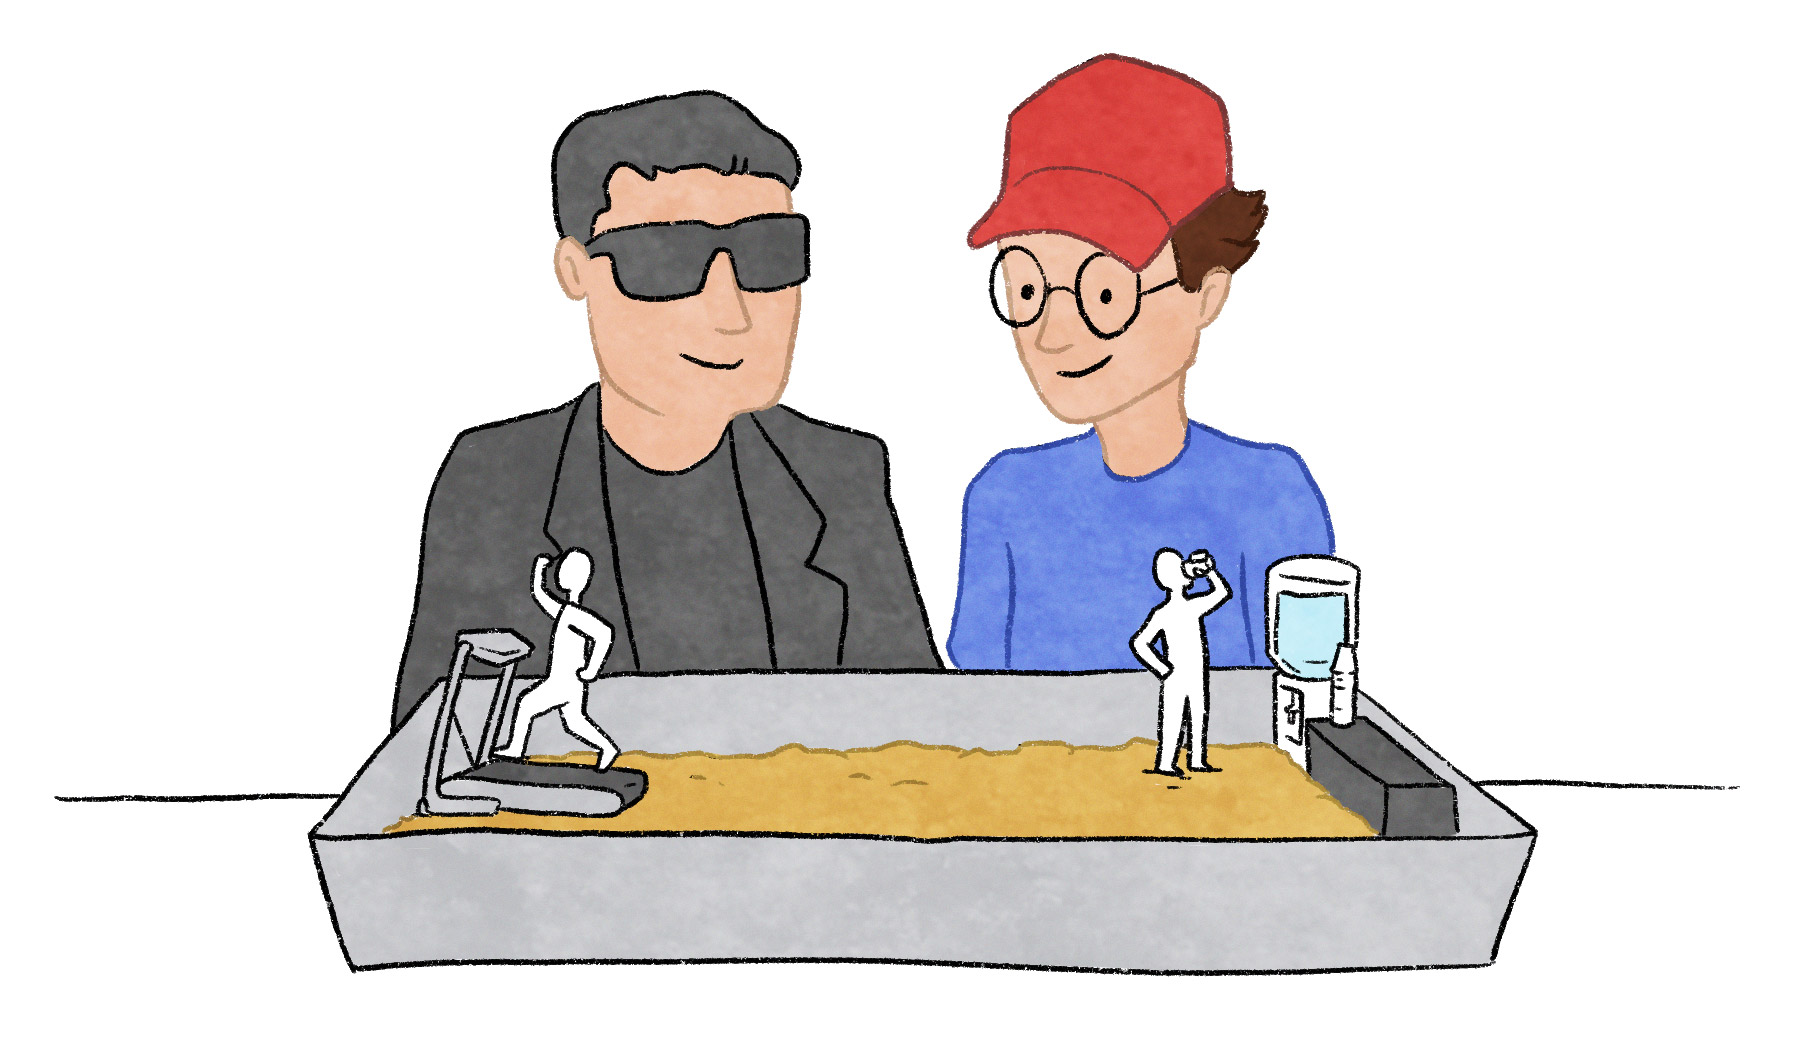 Man wearing sunglasses and man wearing red baseball cap looking proudly at tiny people inside a hamster enclosure with a treadmill and water cooler.